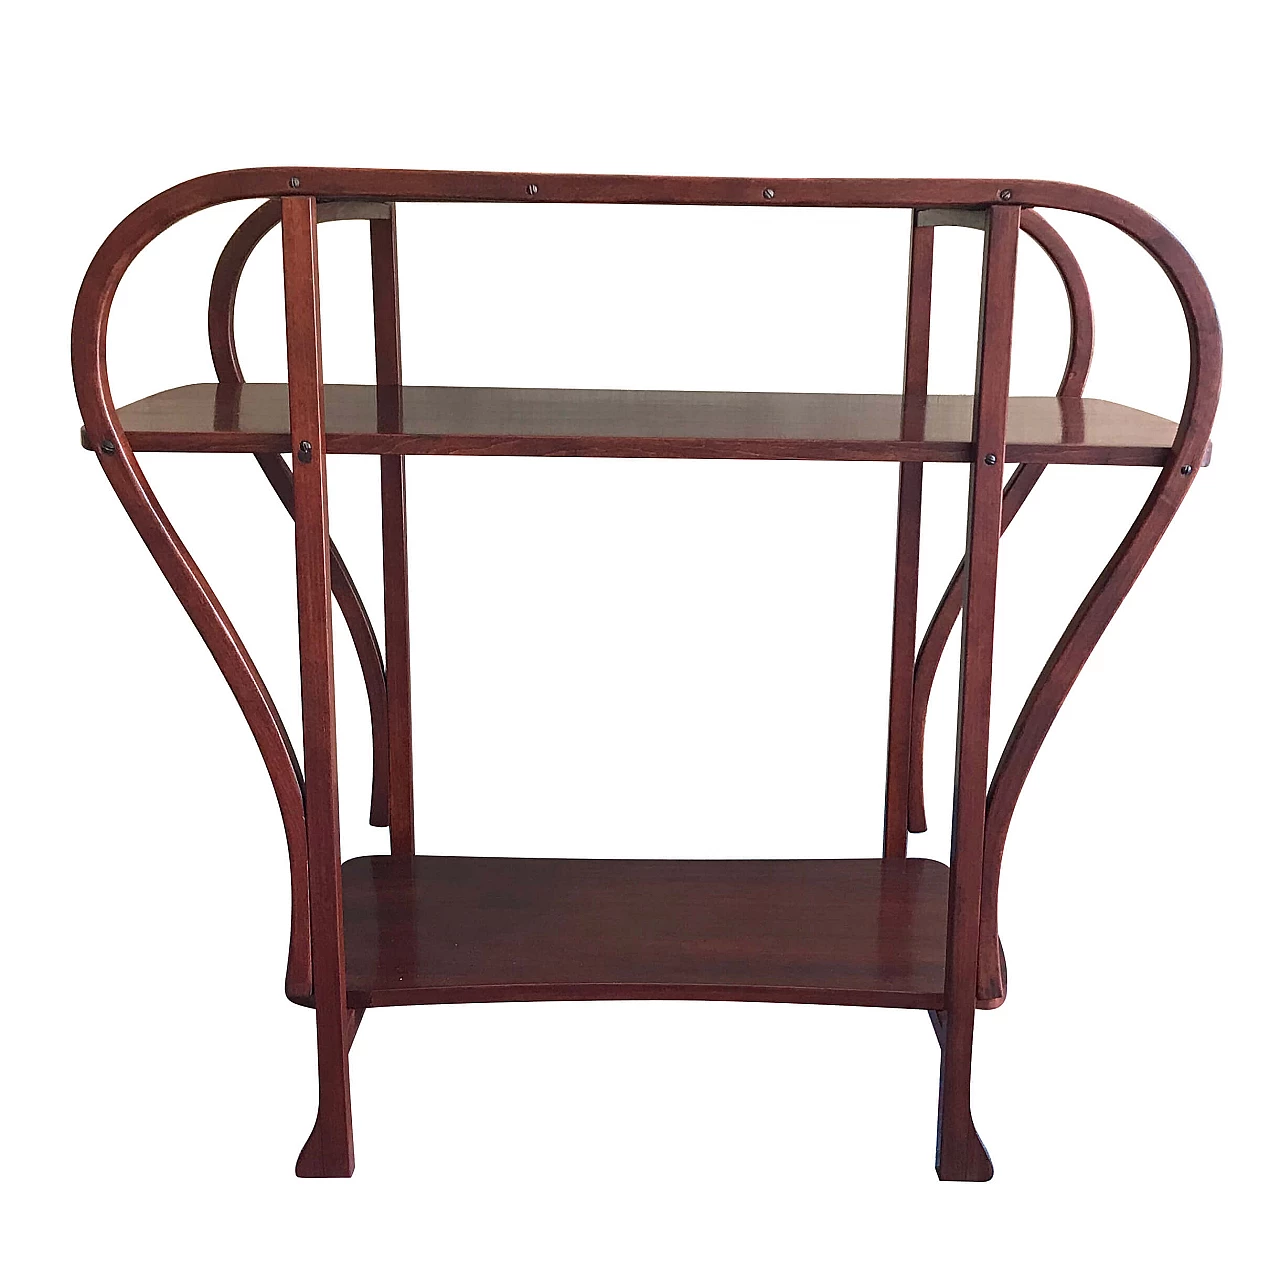 Wooden etagere by Thonet, early 1900s 1242468